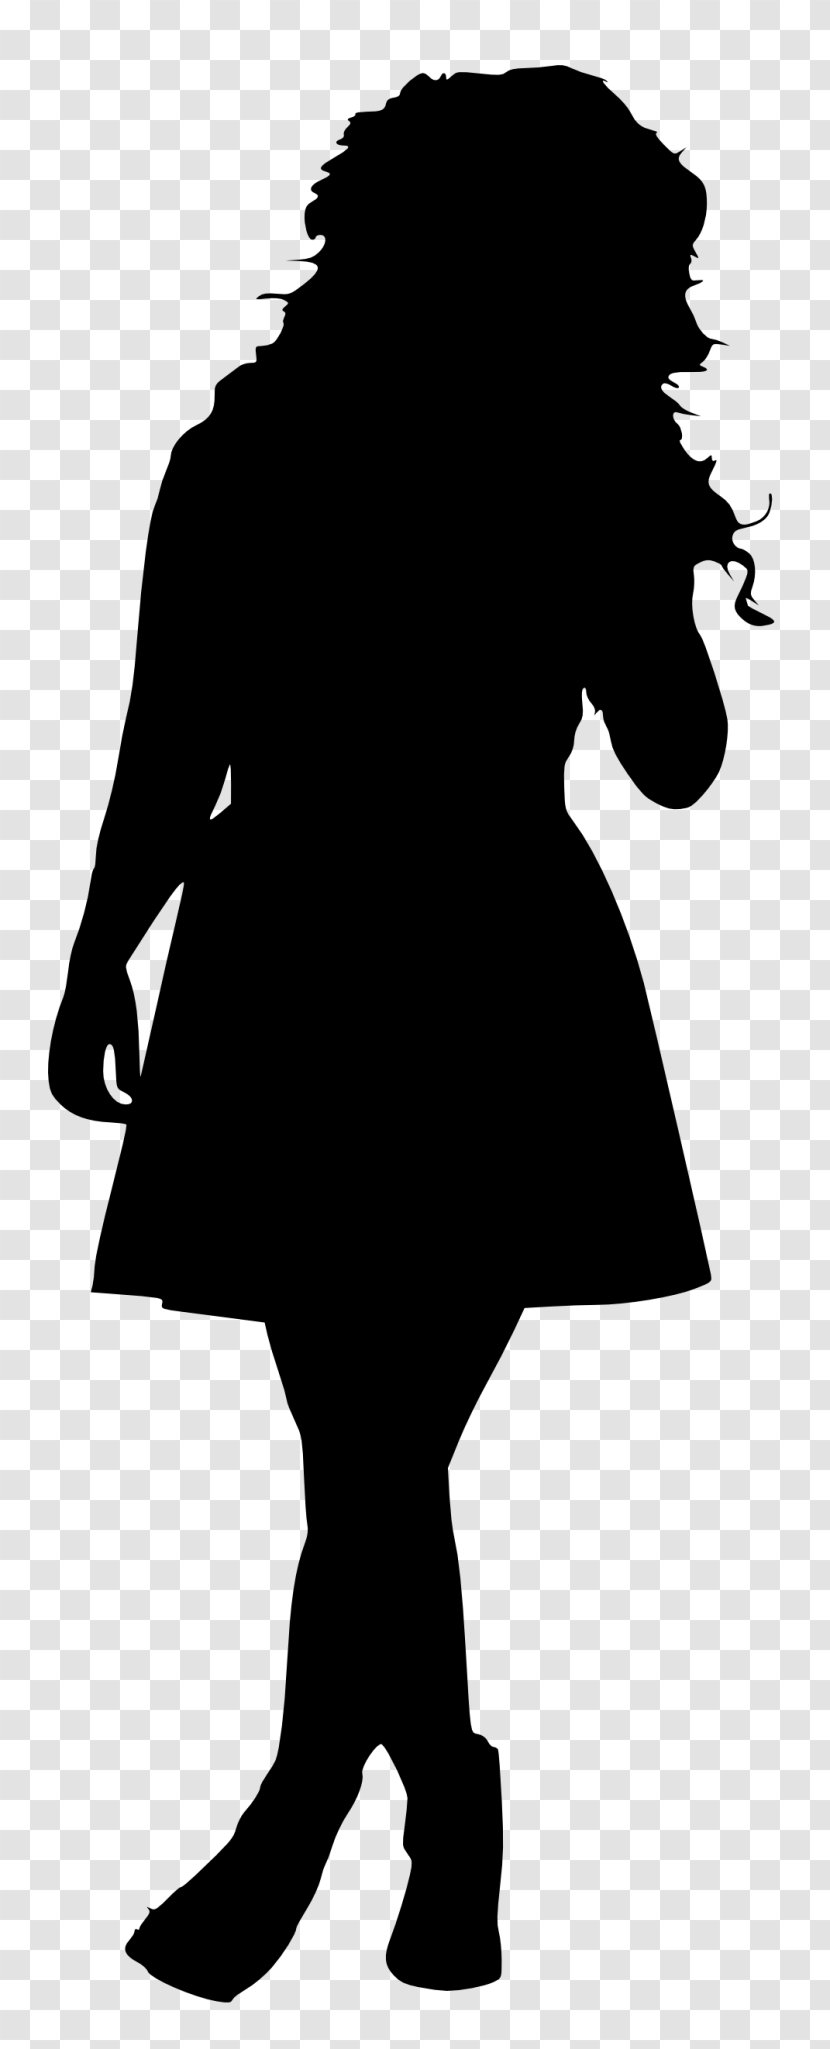 Silhouette Female - Black And White Transparent PNG